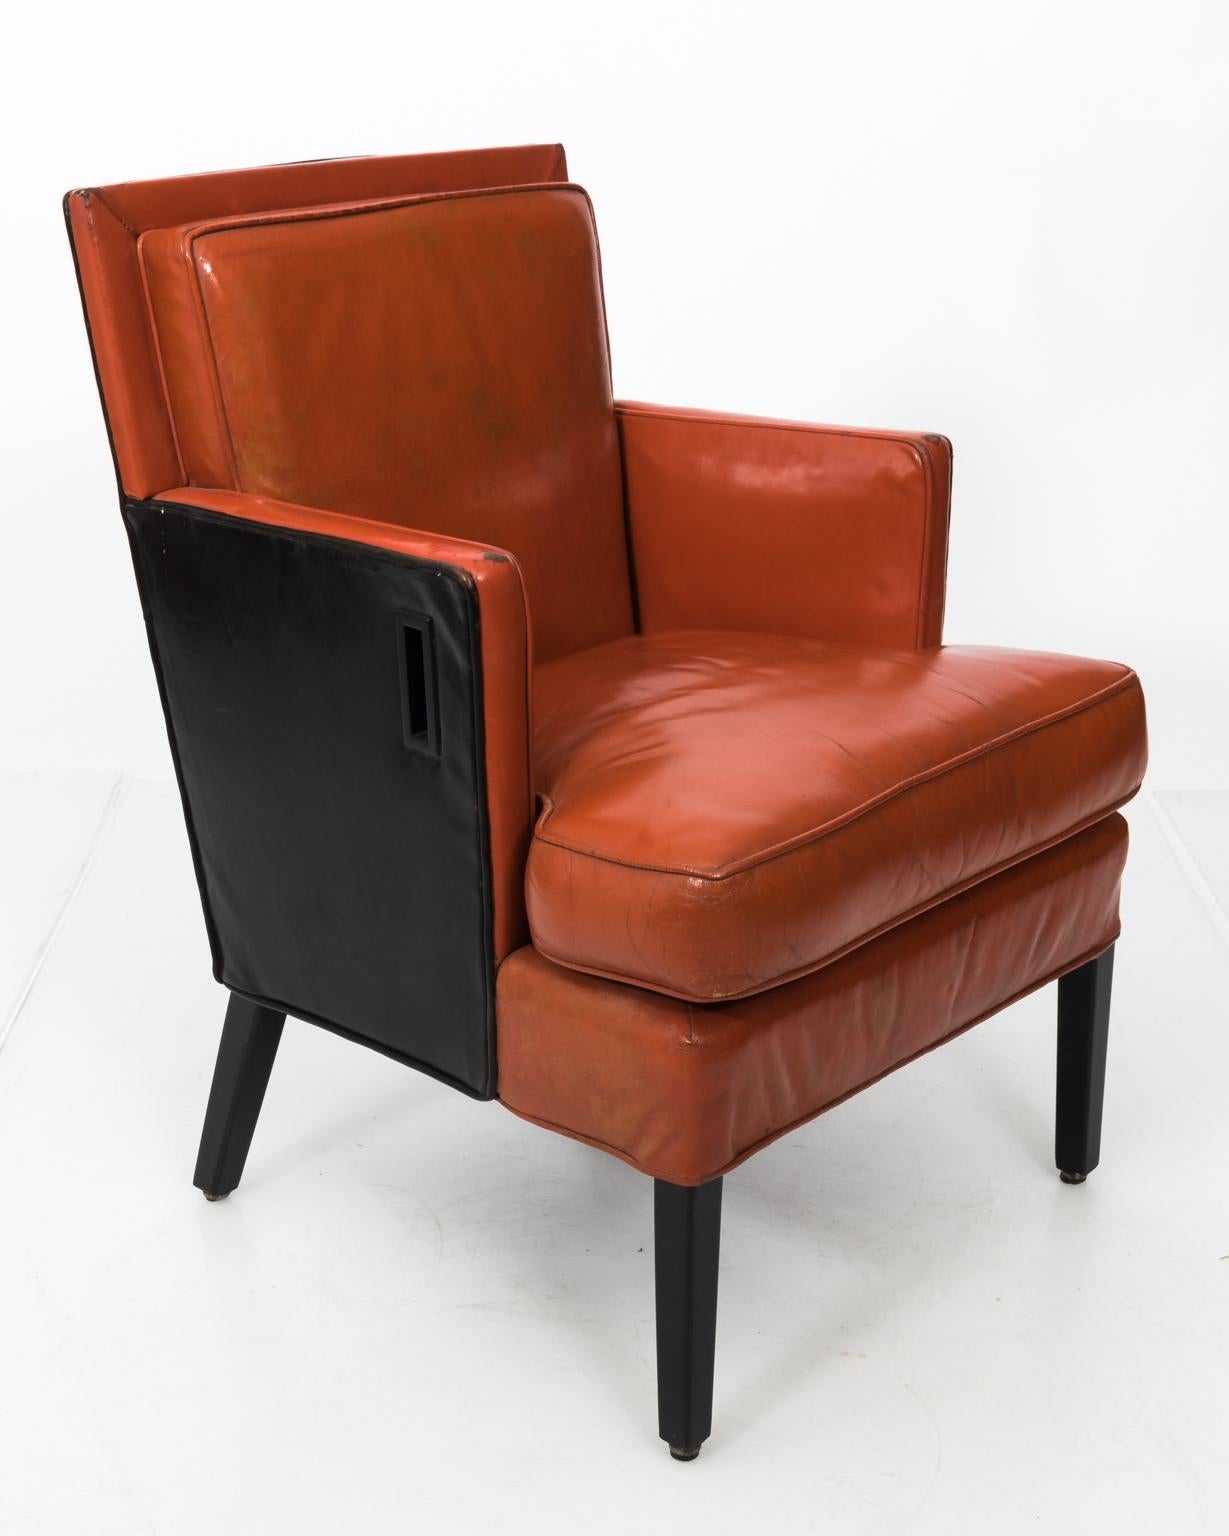 Pair of 1940s Leather Ocean Liner Armchairs In Fair Condition For Sale In Stamford, CT